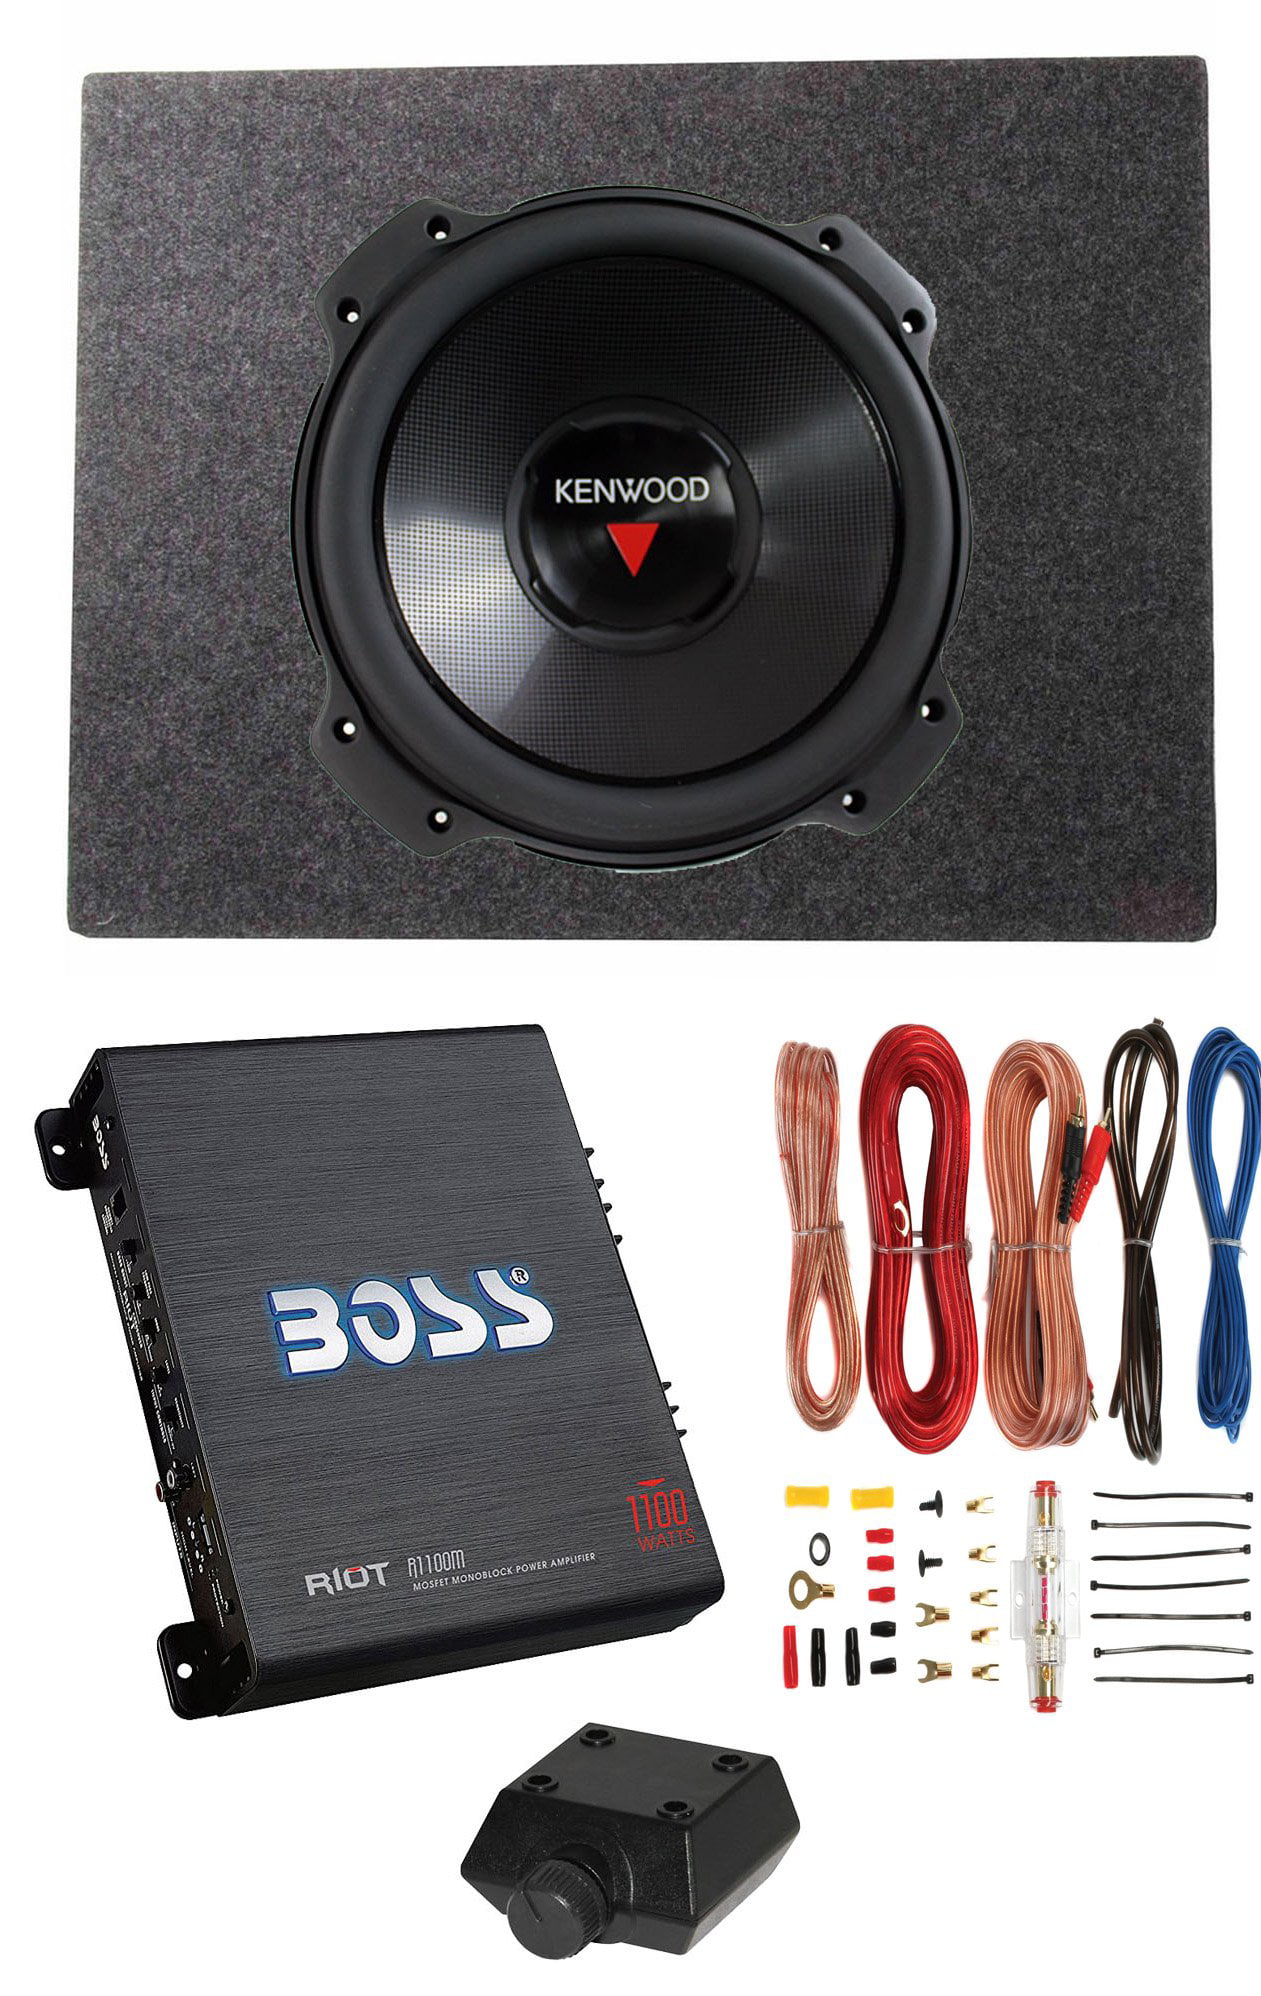 12 inch kenwood subwoofer with box